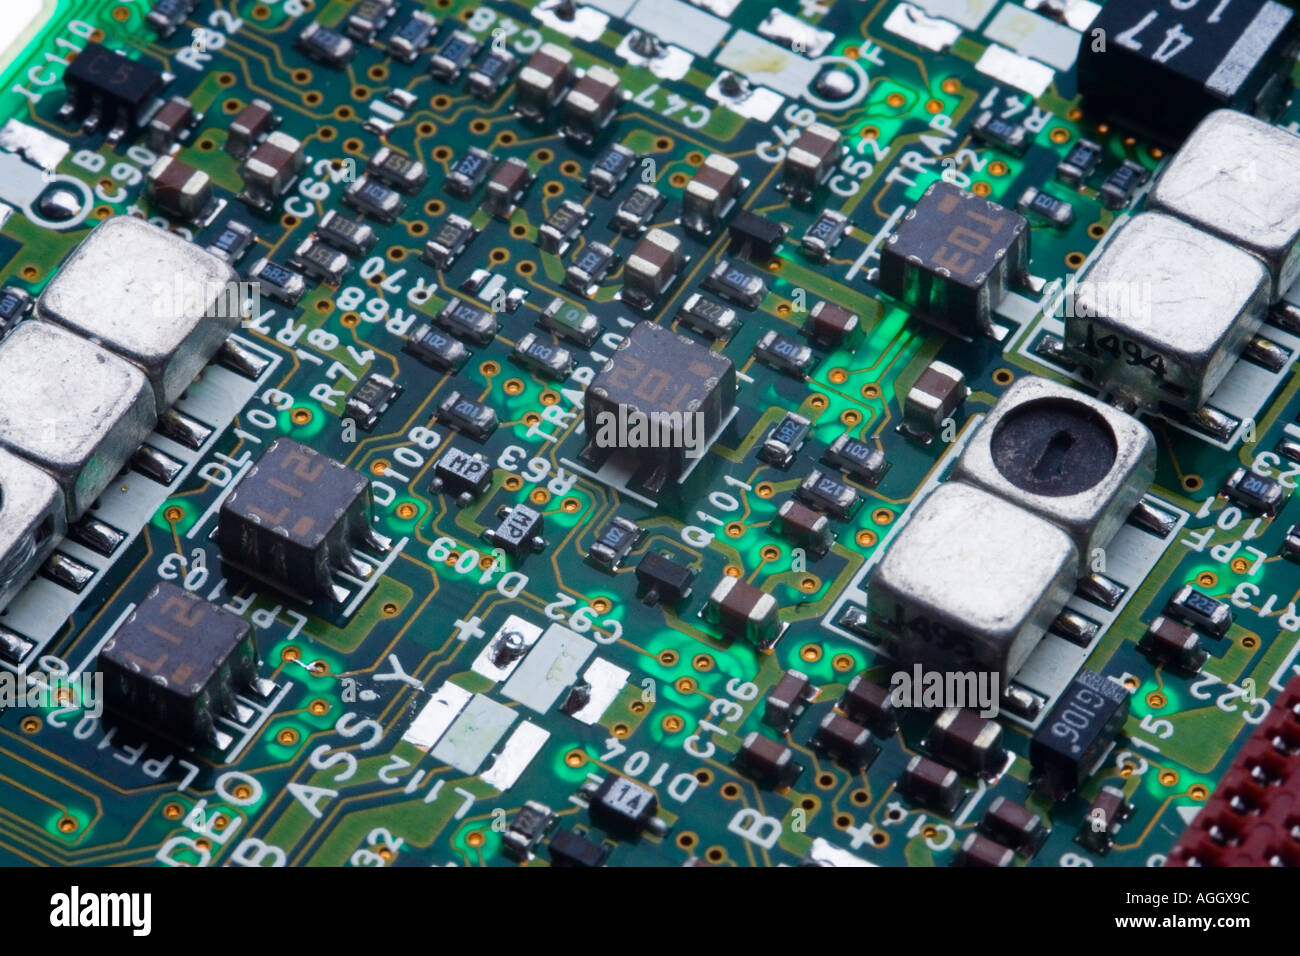 A circuit board showing various electronic components the construction is surface mount technology looking like a crowded city Stock Photo